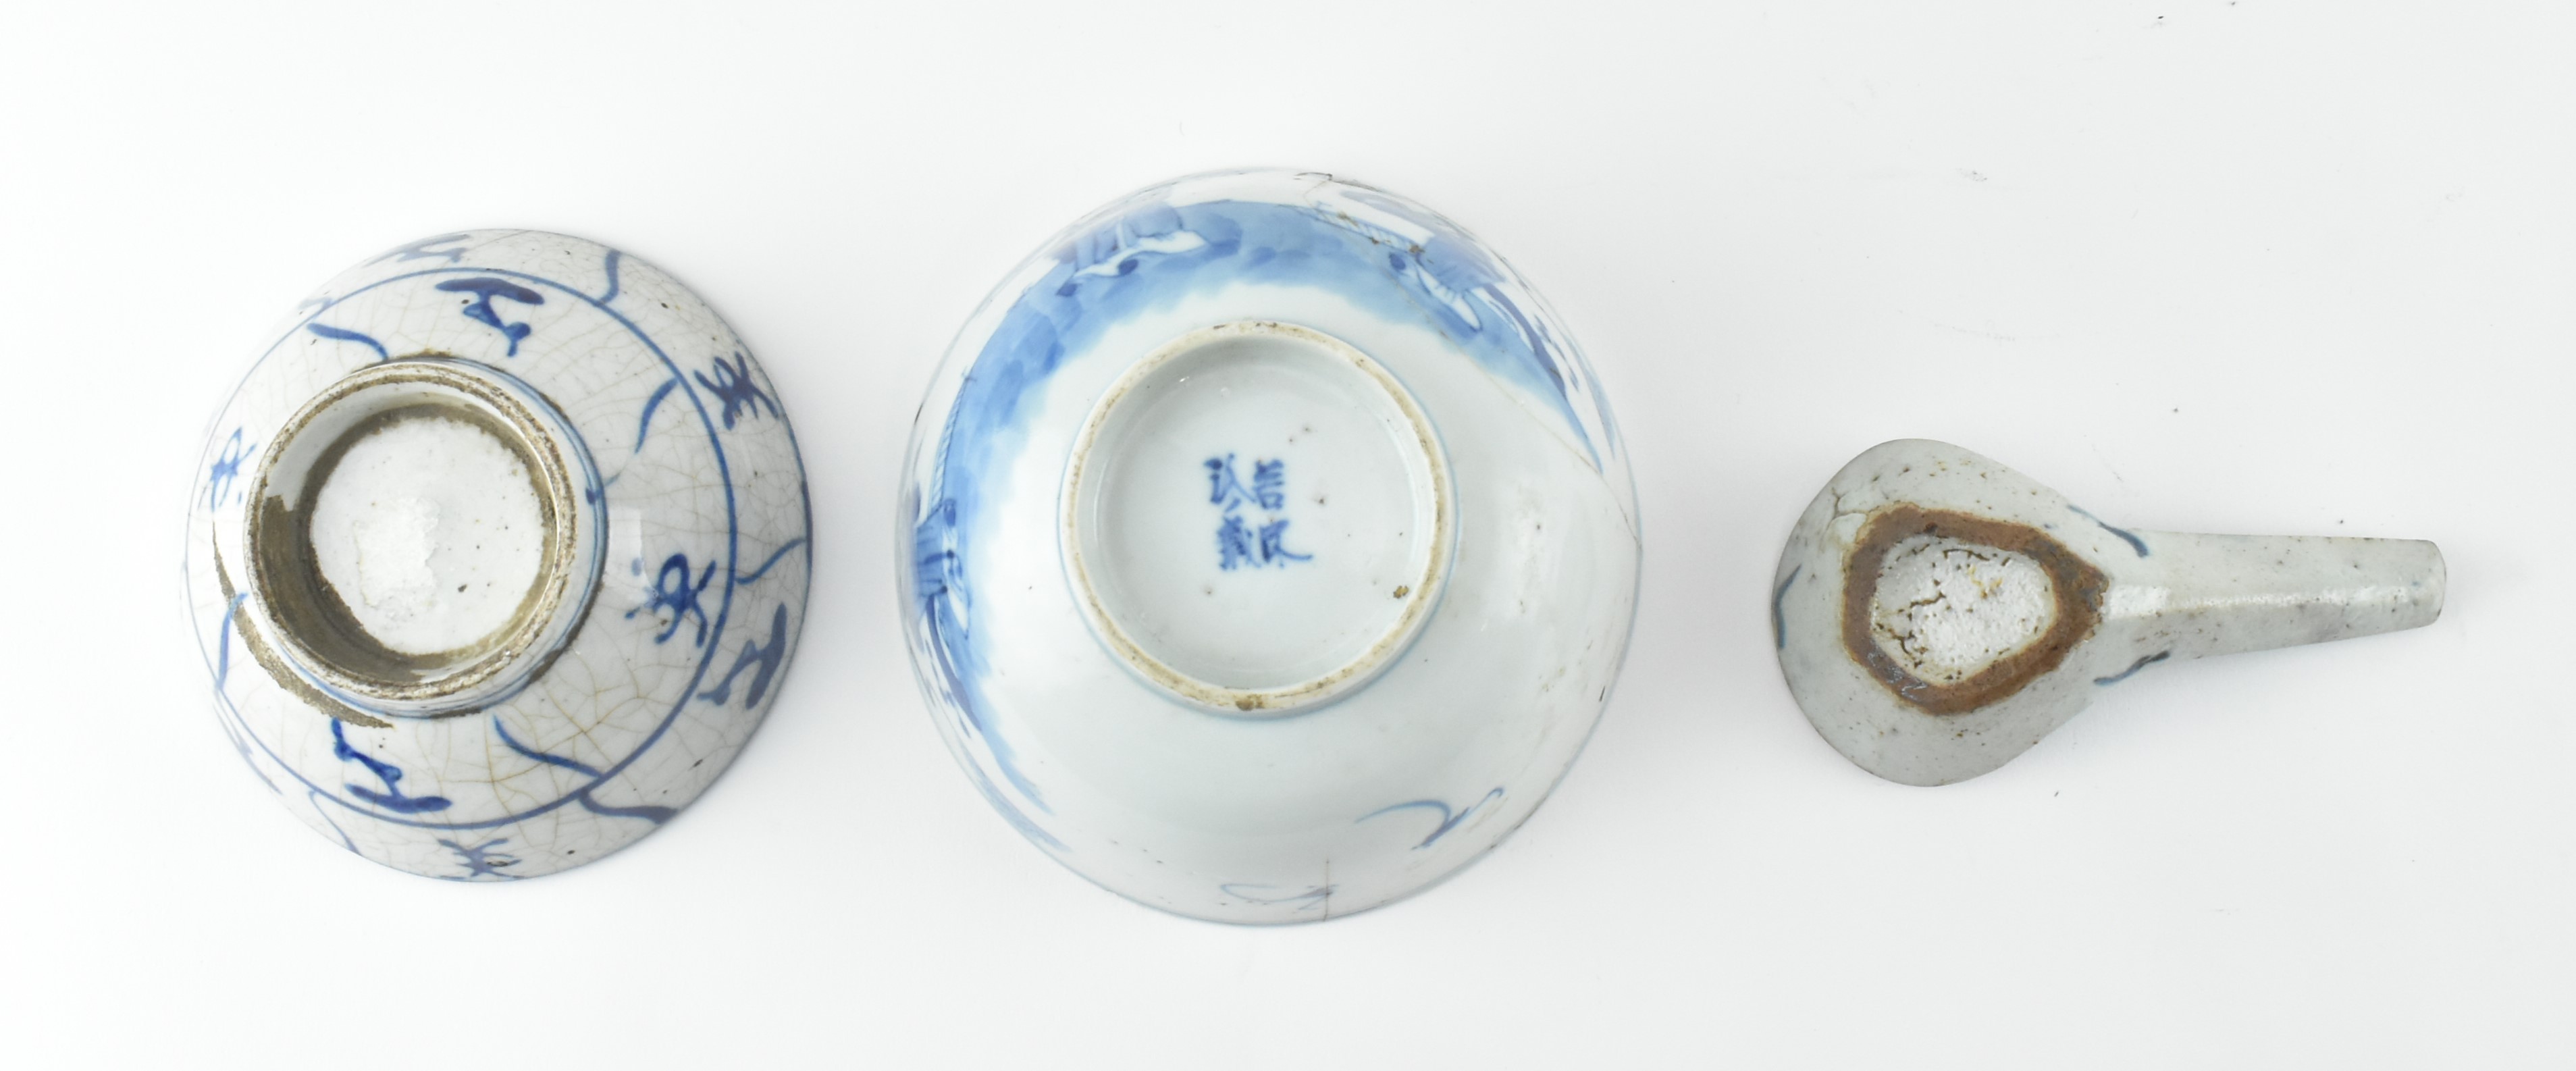 GROUP OF SIX QING DYNASTY CERAMIC ITEMS 清 陶瓷六件 - Image 7 of 7